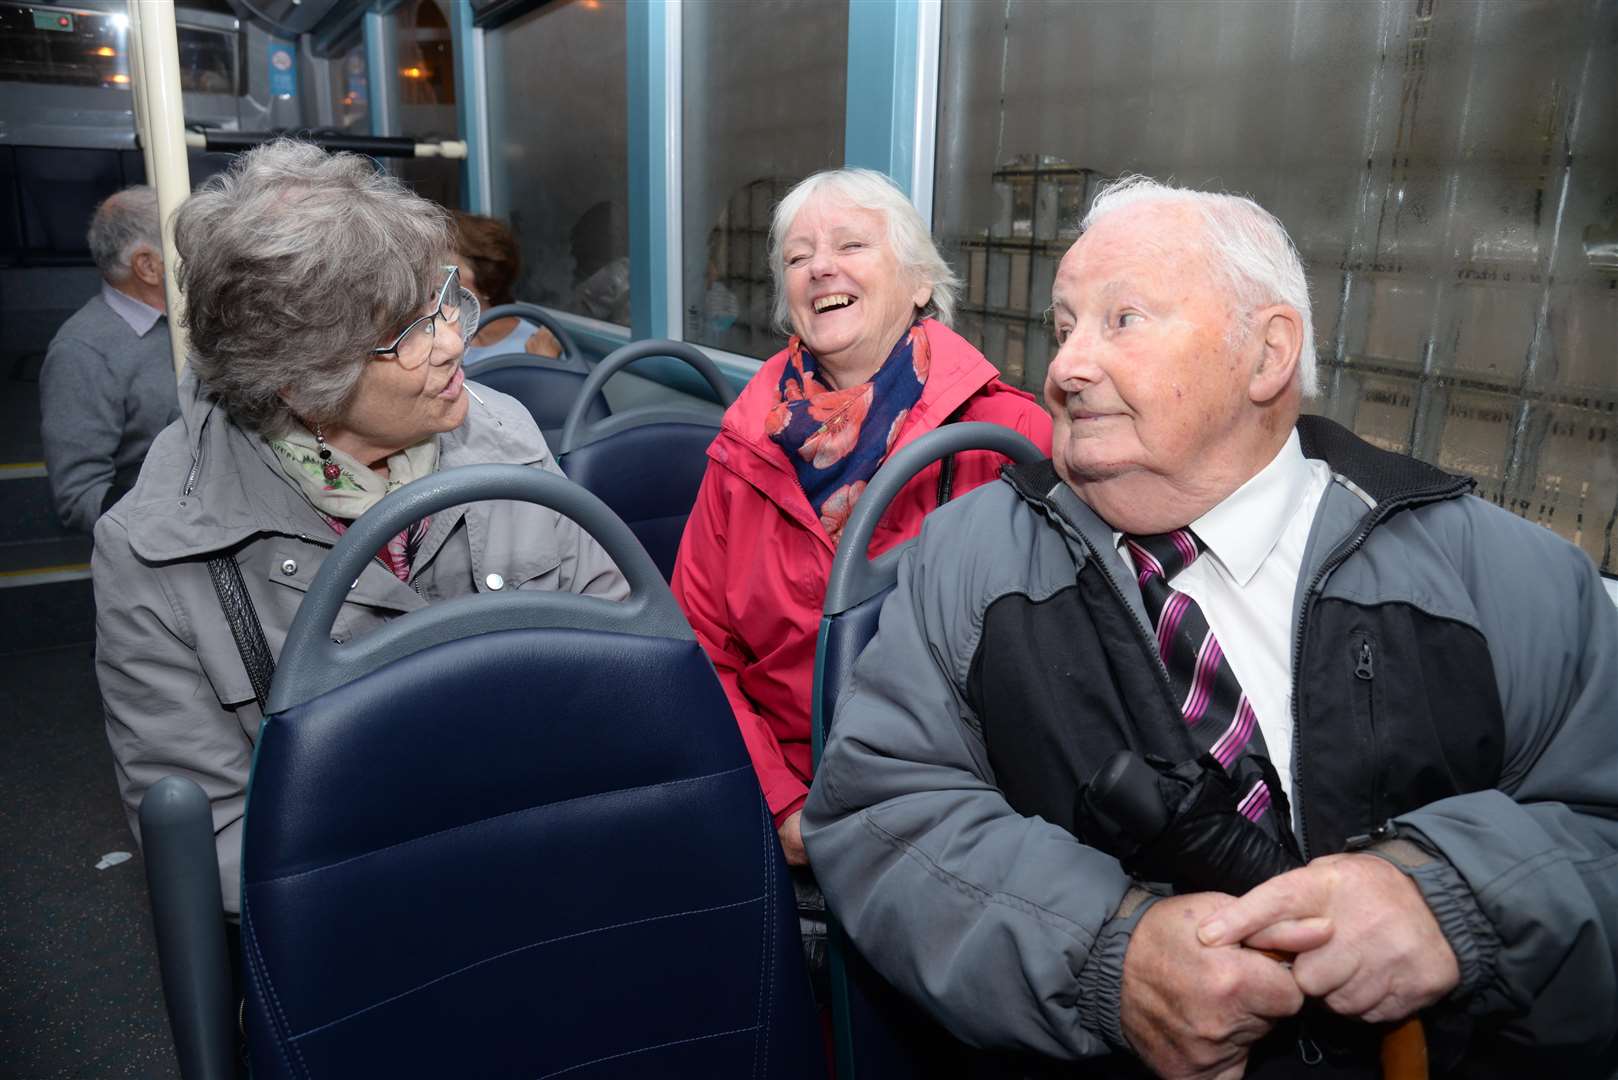 Diana Thomas, Lorraine Smith-Lowther and Michael Brown chat on-board the talking bus. Picture: Chris Davey